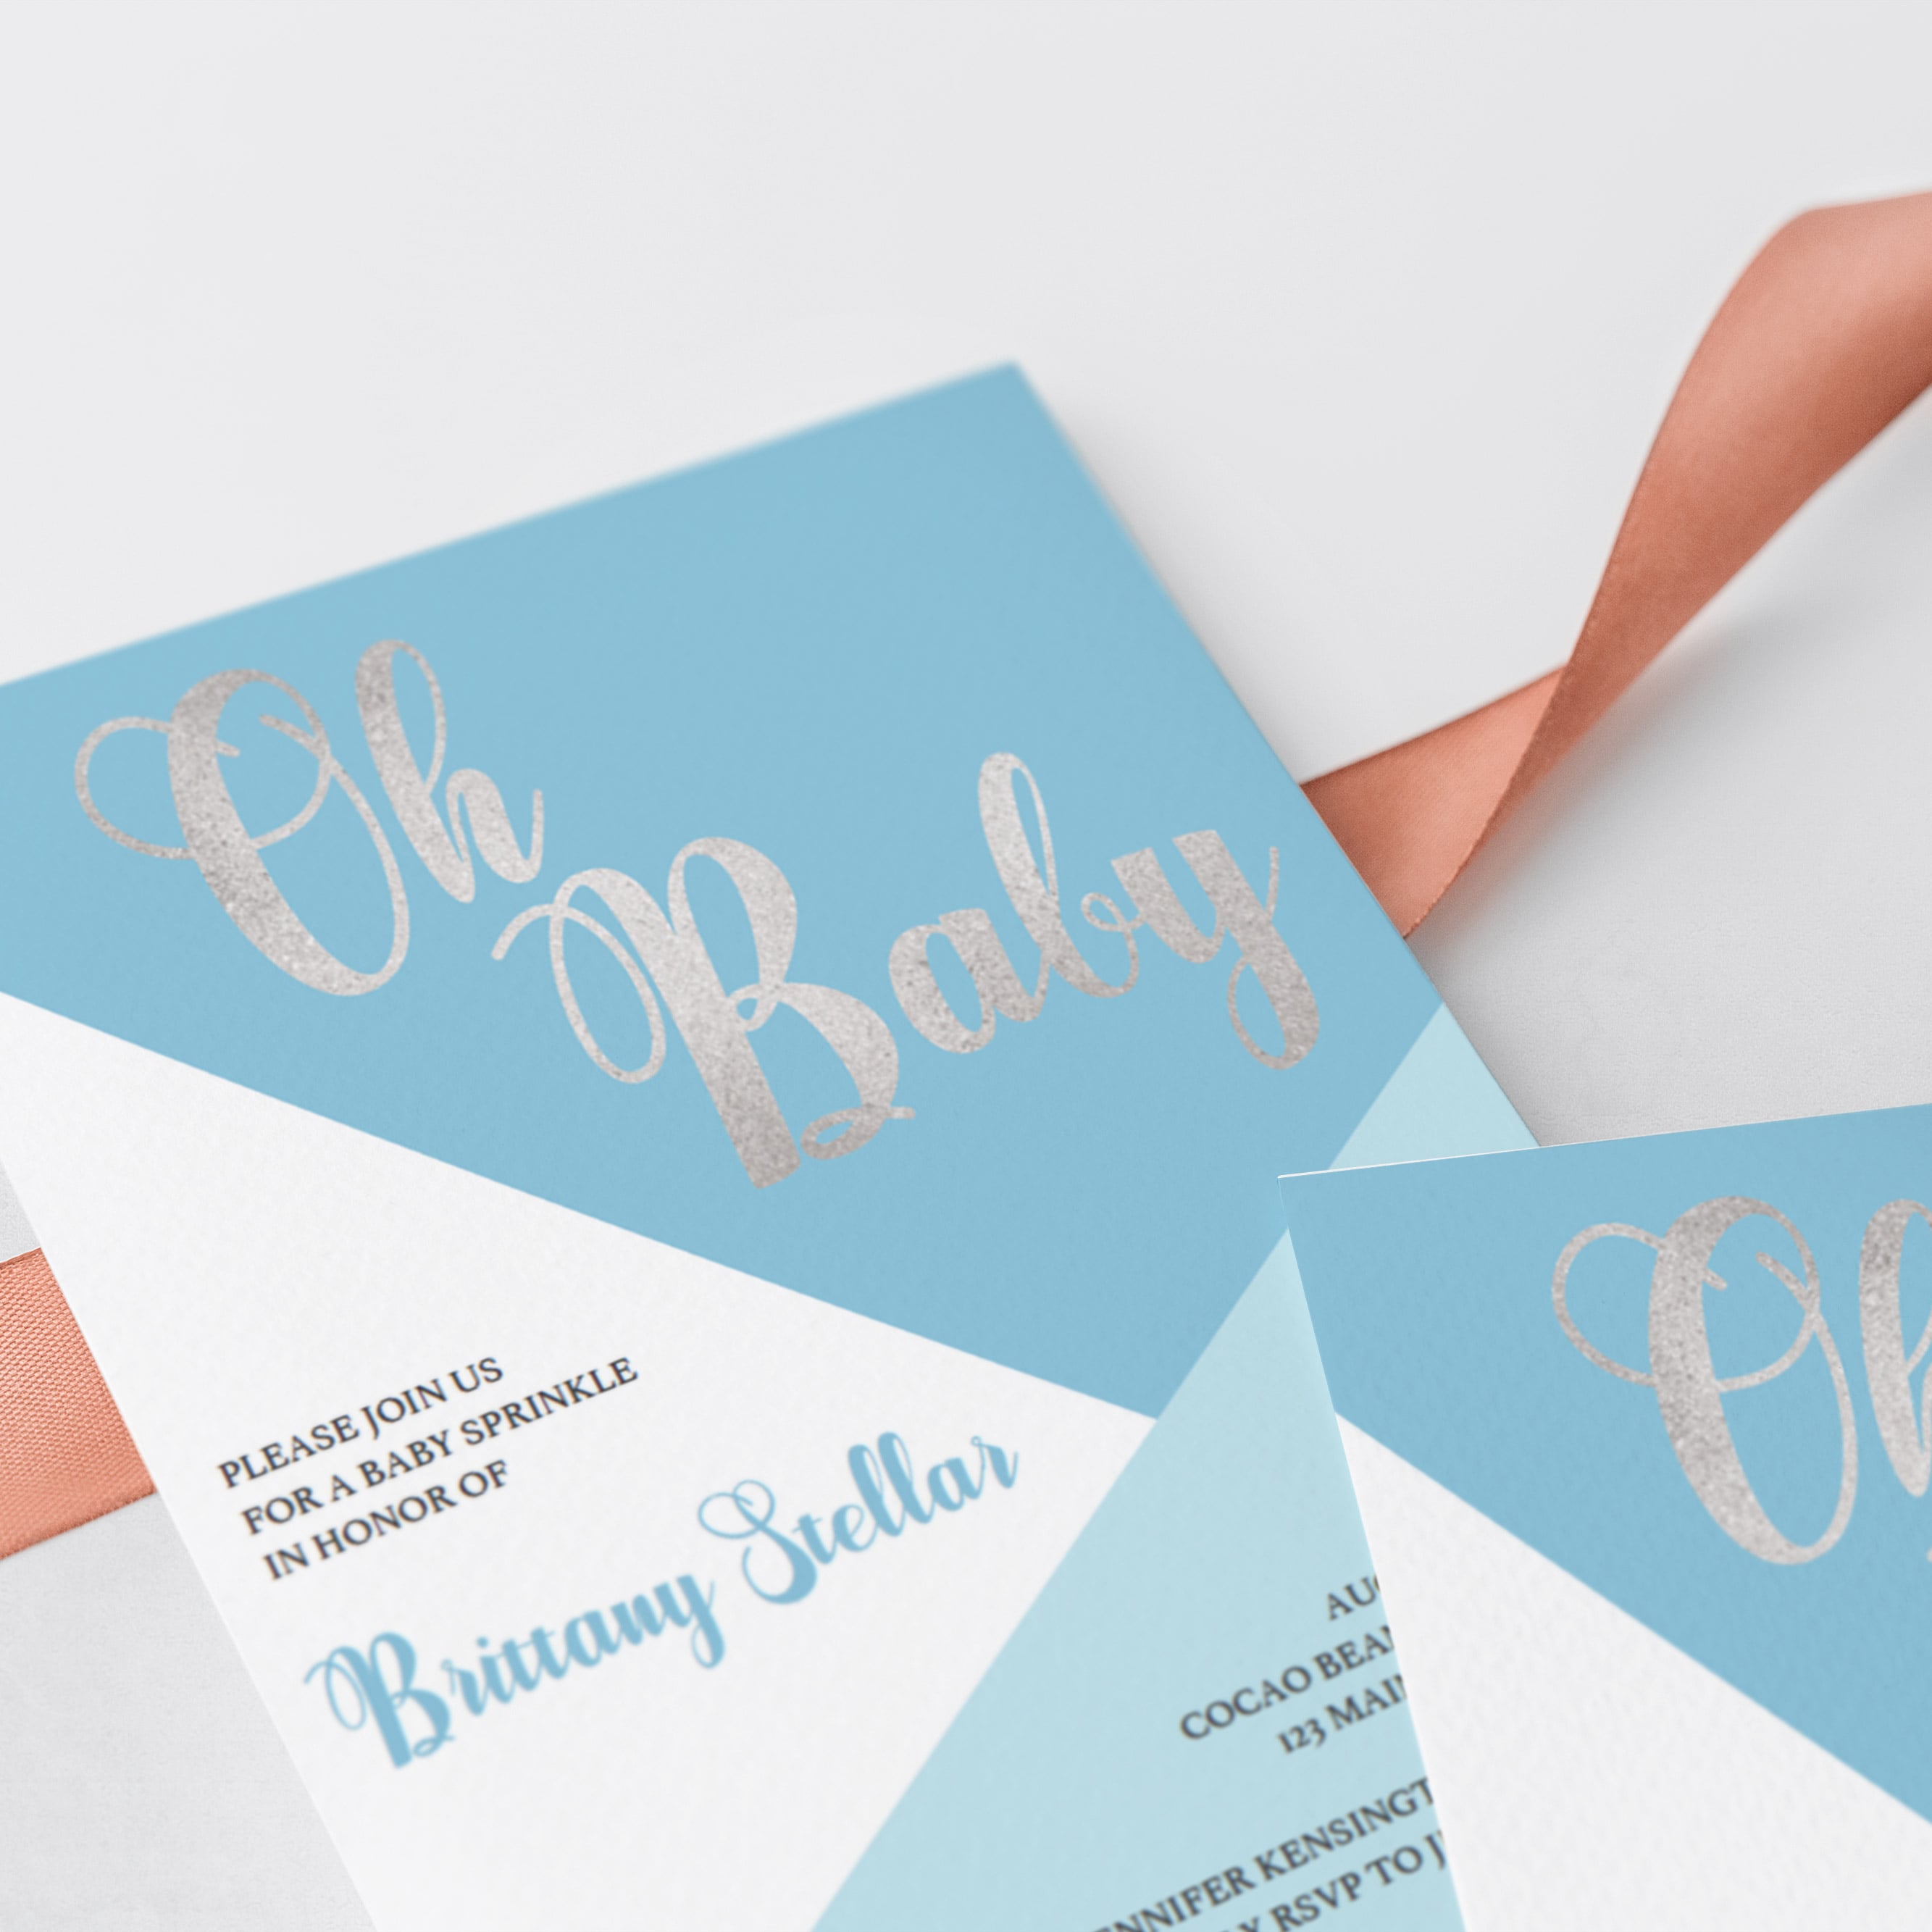 Boy baby sprinkle invitation blue and silver by LittleSizzle